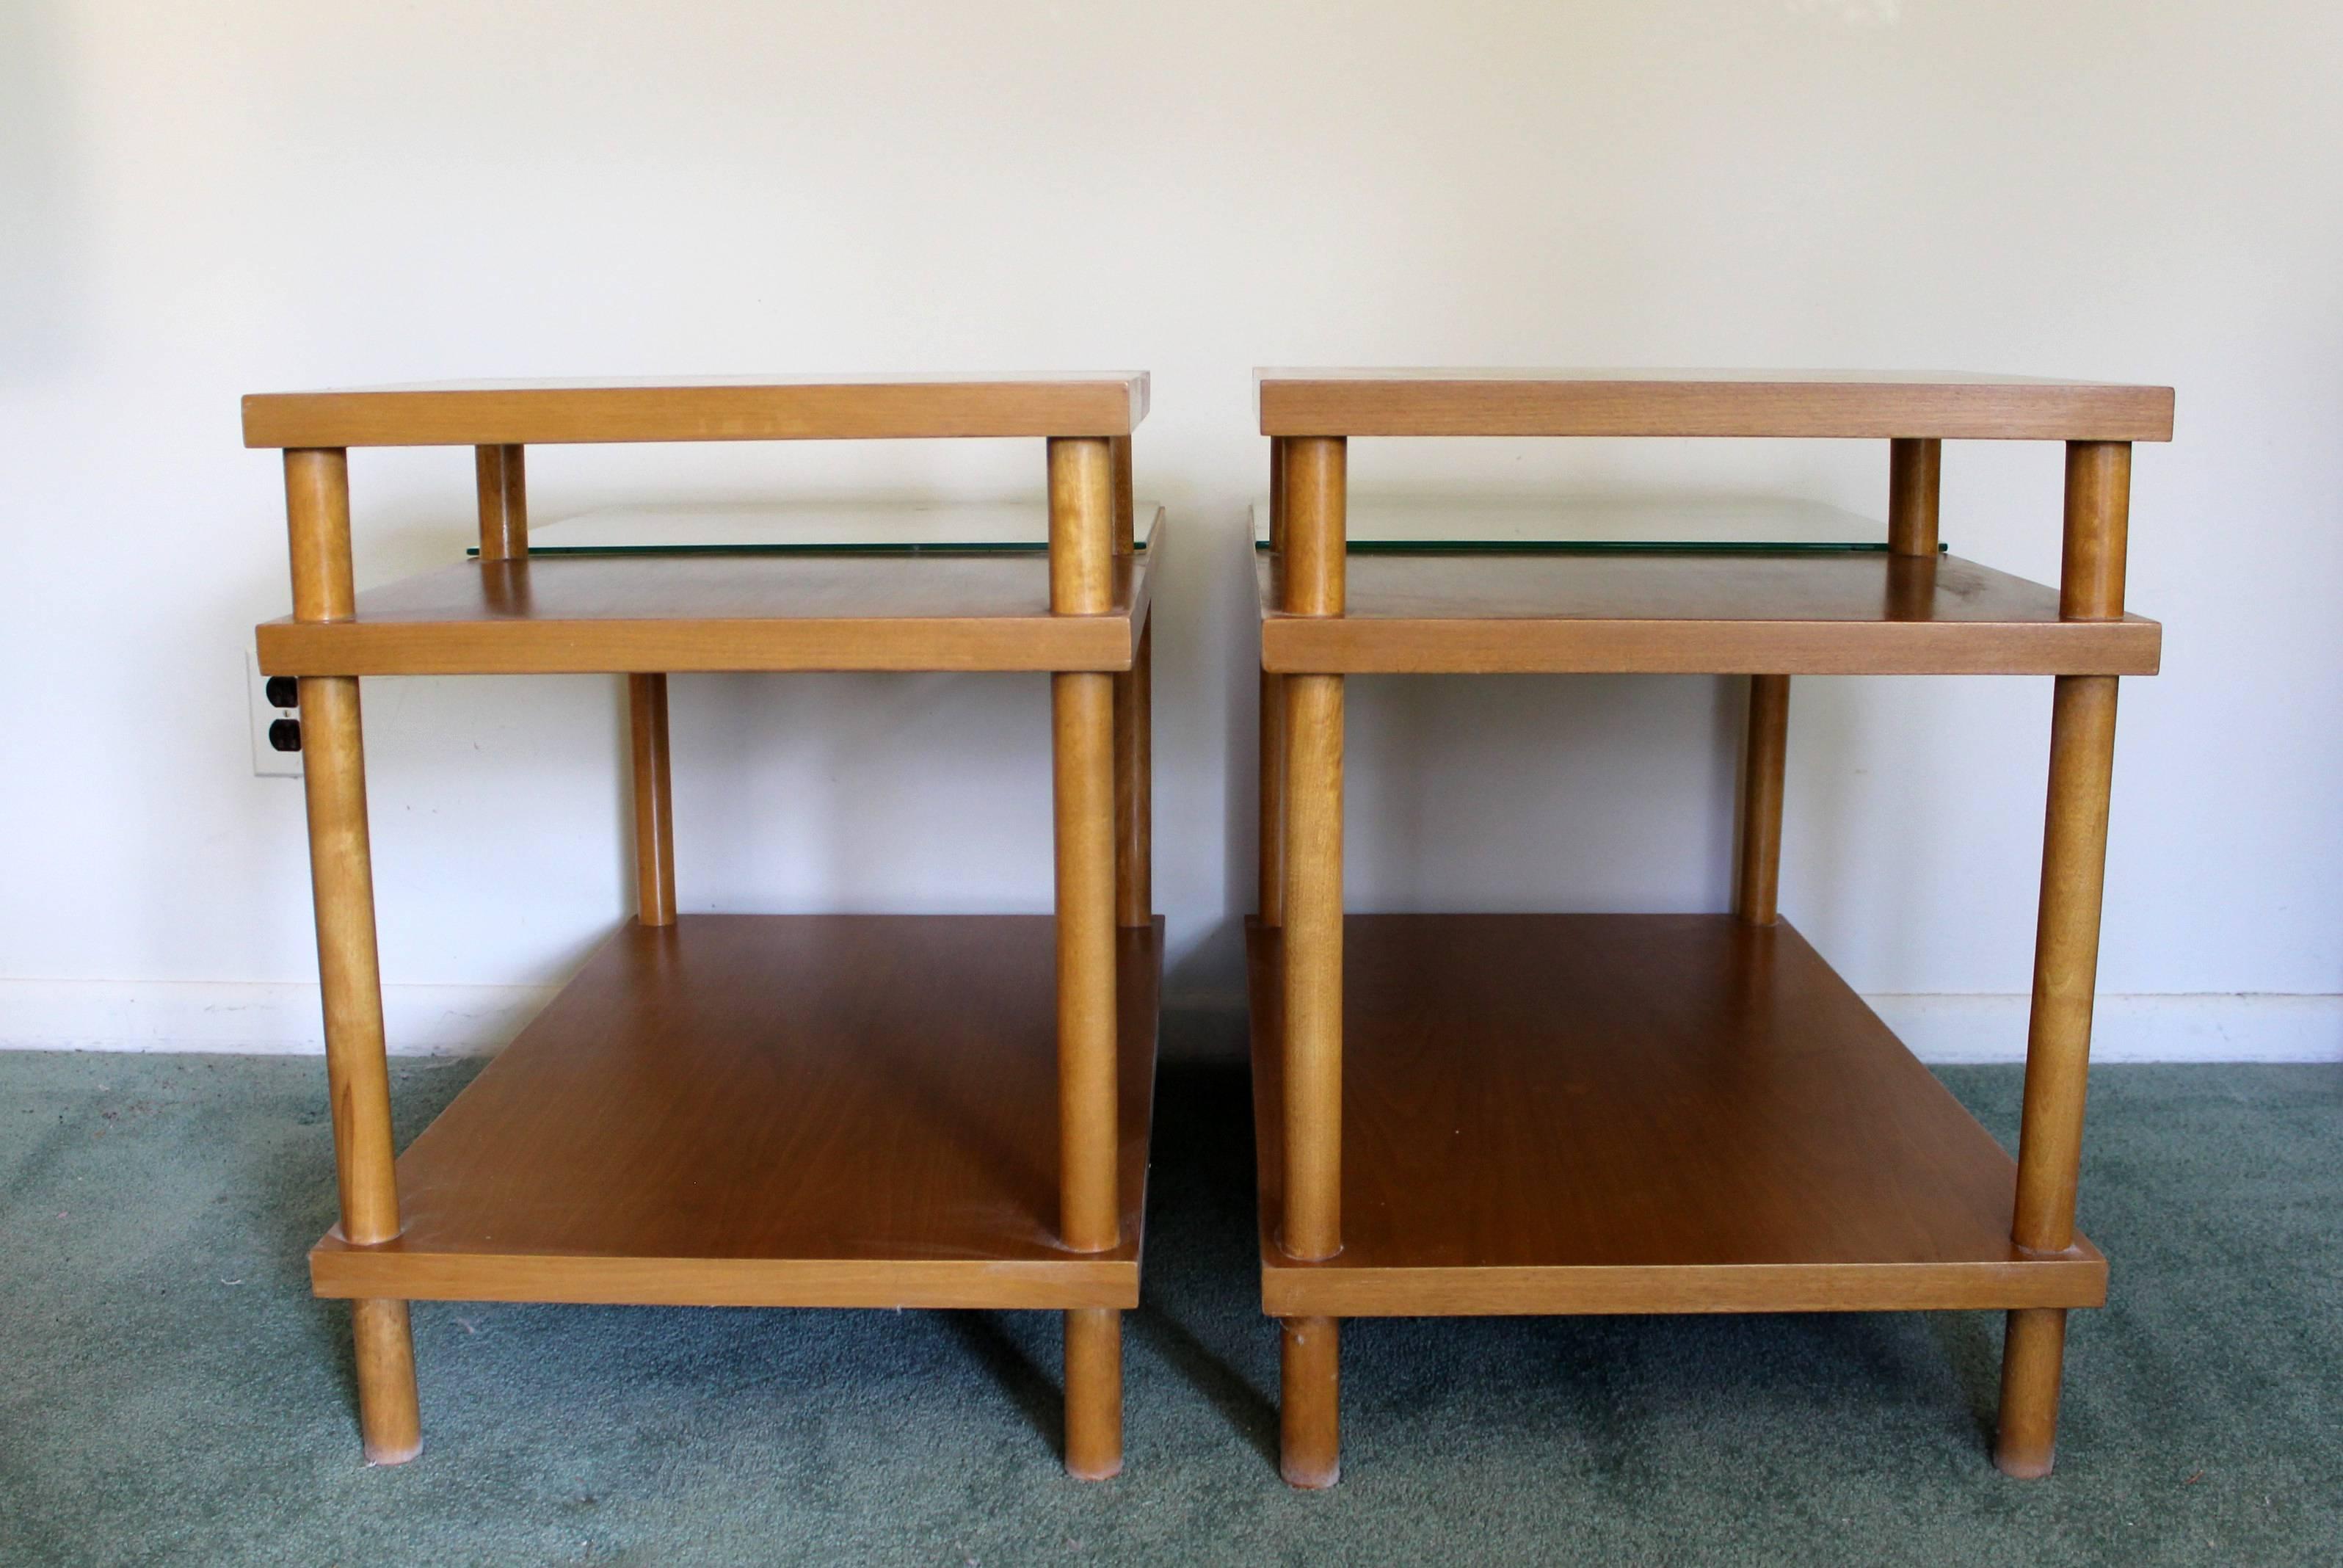 For your consideration is a fantastic pair of unique, two tiered side tables by Robsjohn-Gibbings for Widdicomb. Excellent condition with original tags. The dimensions are 29.5